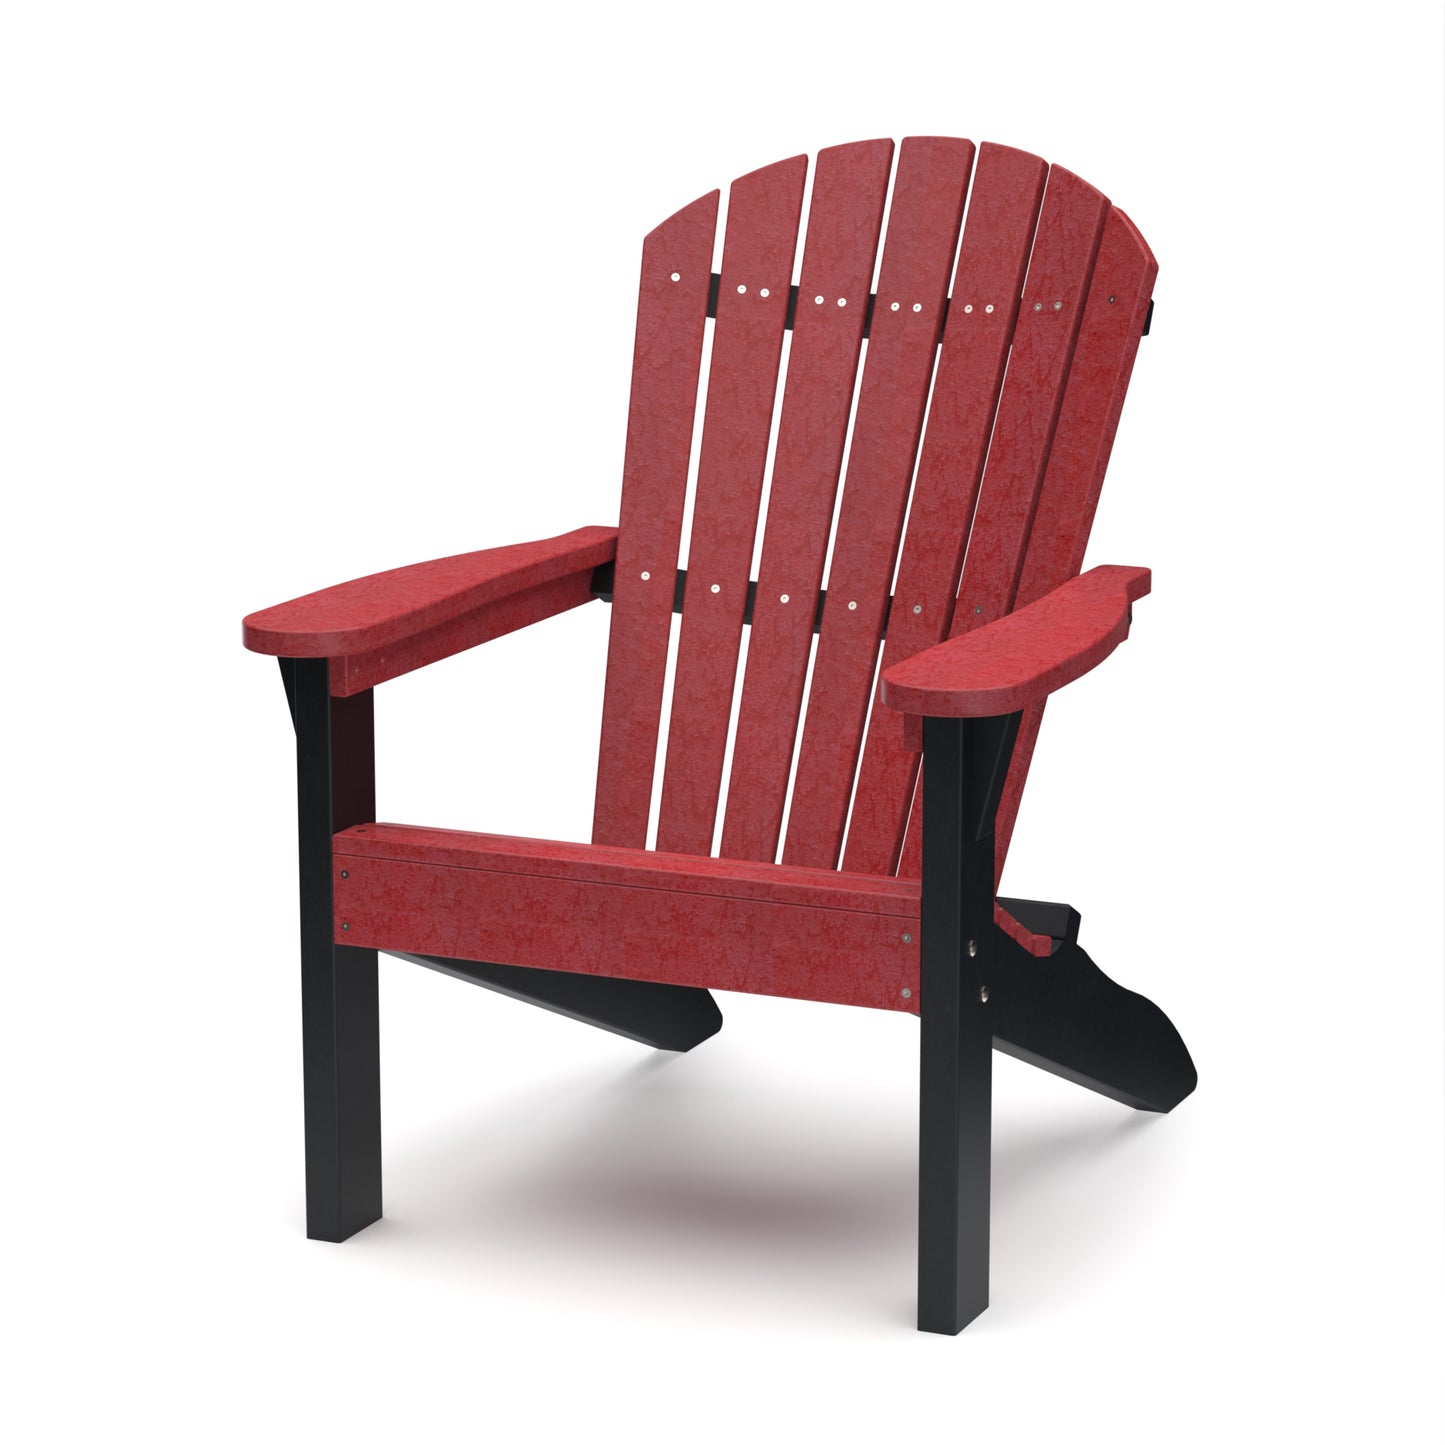 Wildridge LCC-110  Recycled Plastic Heritage Adirondack Chair - LEAD TIME TO SHIP 6 WEEKS OR LESS